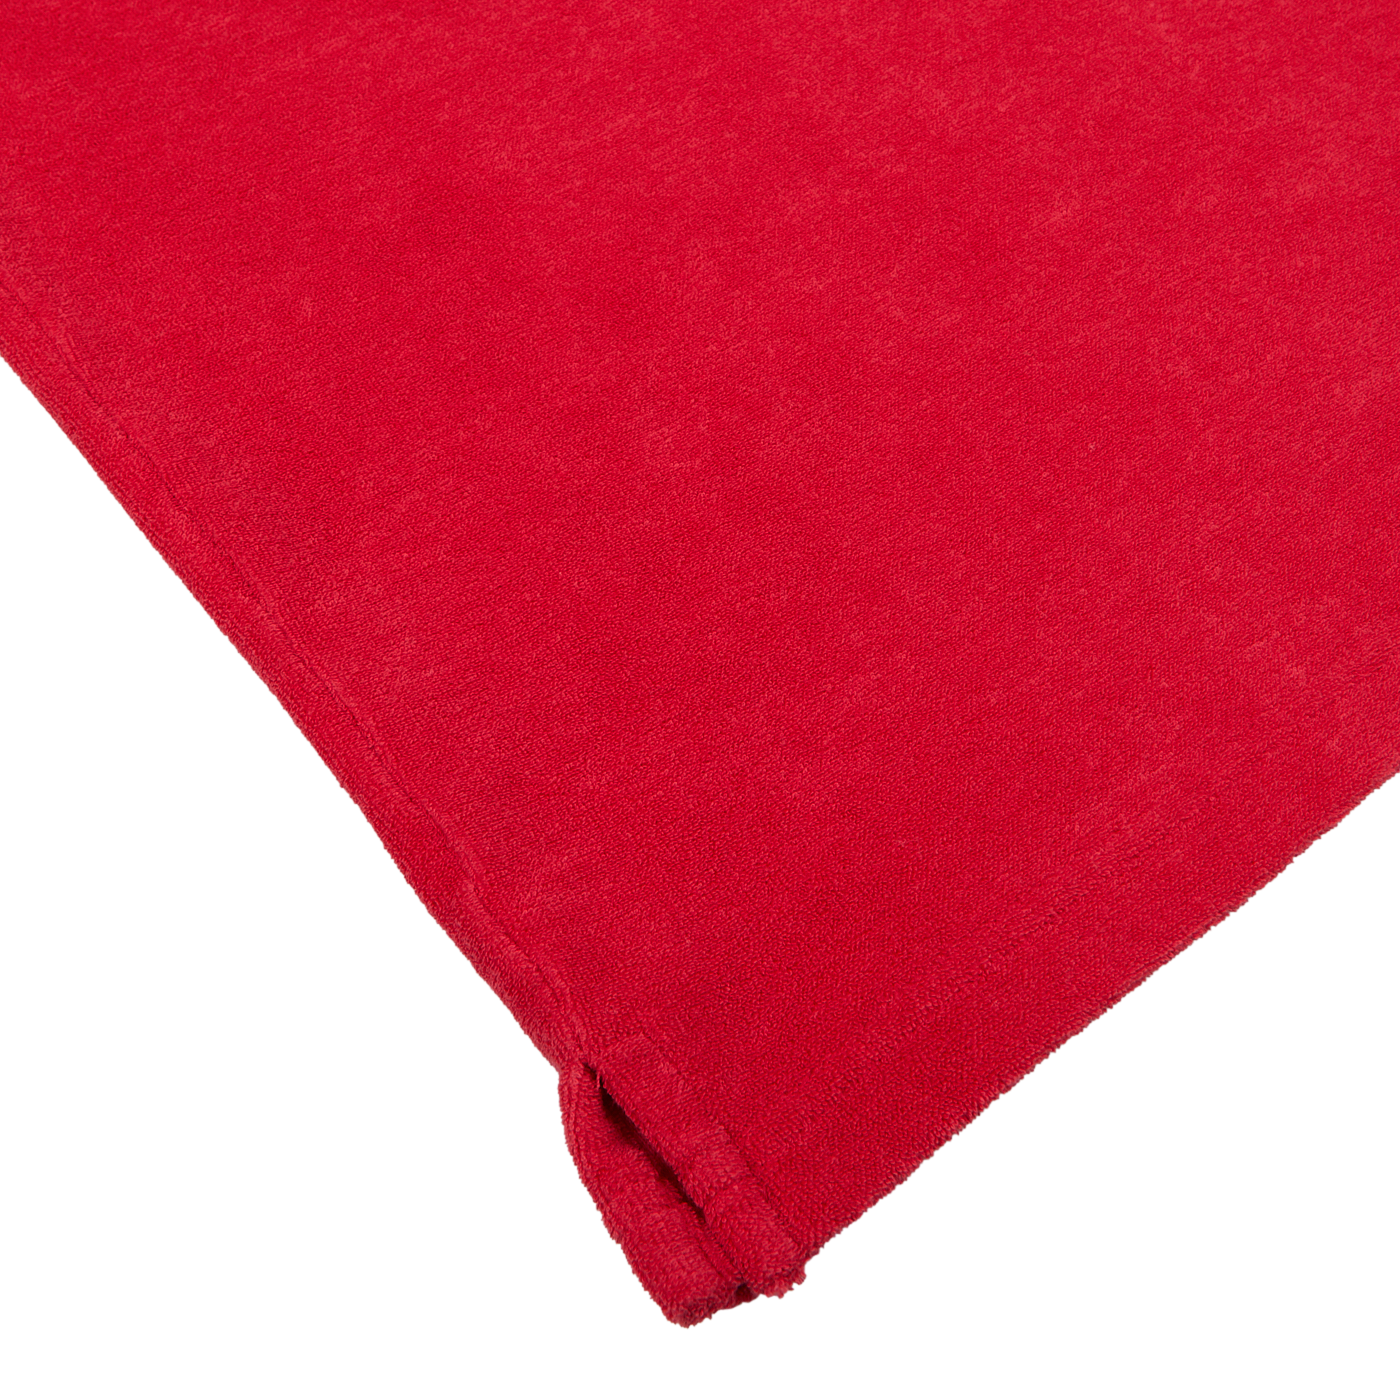 Altea Coral Red Cotton Towelling Capri Collar Polo Shirt fabric with a neatly folded edge on a white background.